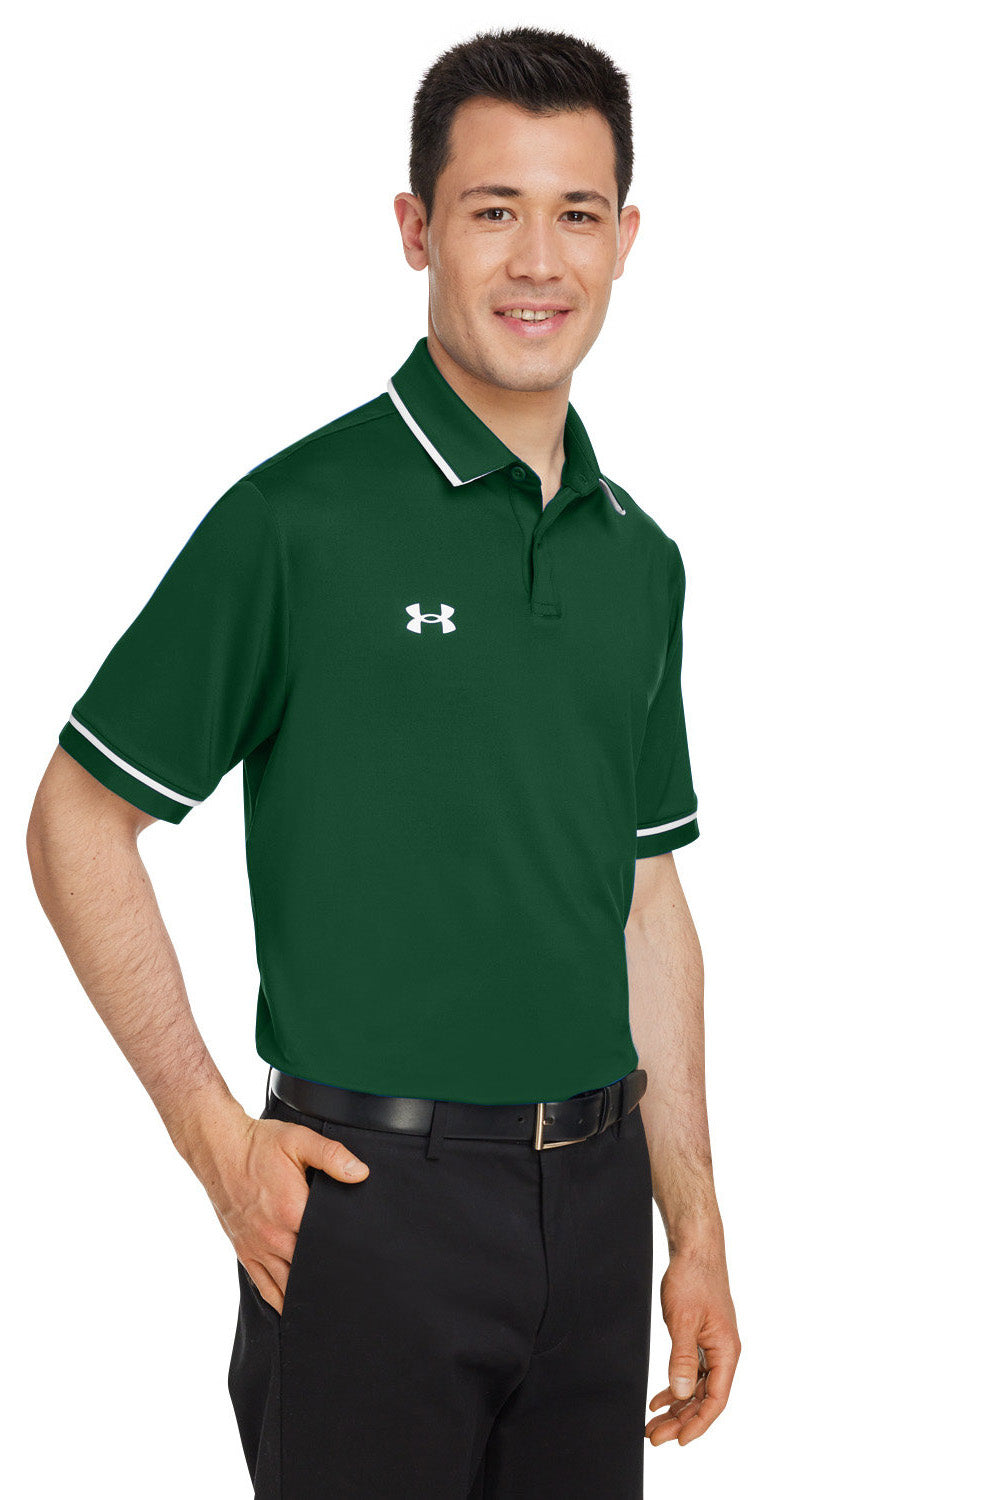 Under Armour 1376904 Mens Teams Performance Moisture Wicking Short Sleeve Polo Shirt Forest Green Model 3Q